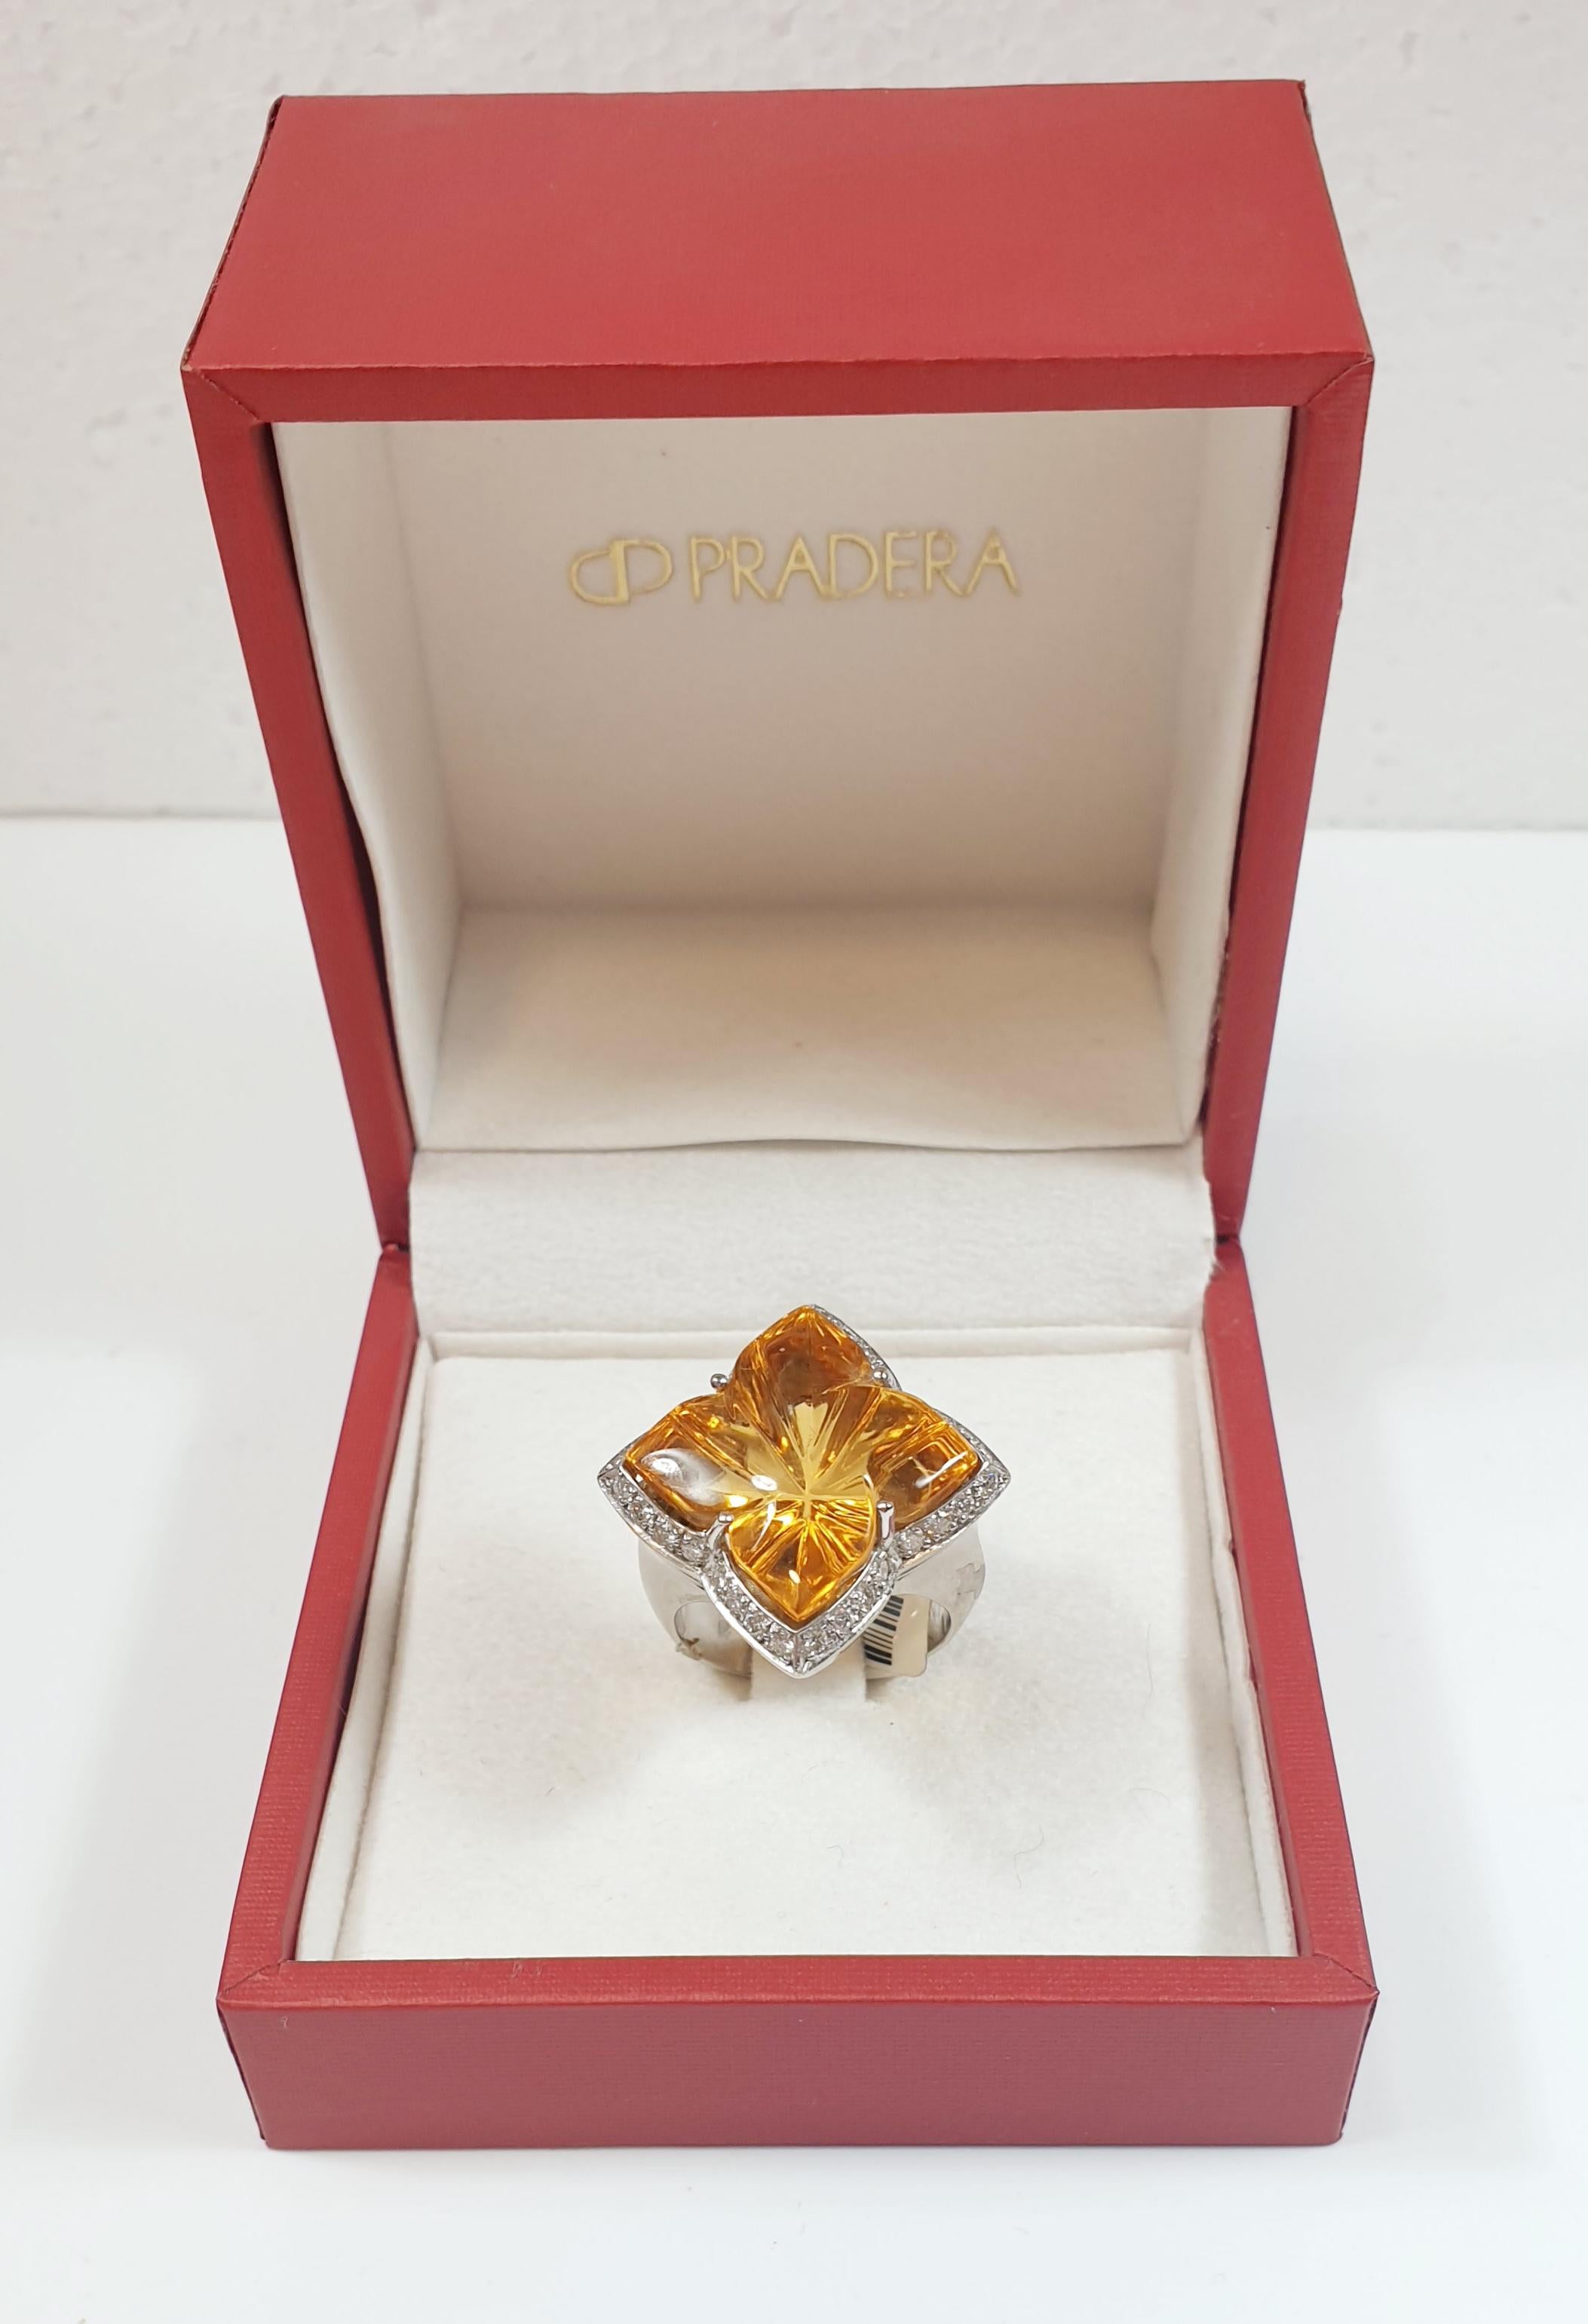 Lucky Clover Ring 18K White Gold with Diamonds and central Lemmon Citrine
Ring 18K White Gold with Citrine as the Center Stone surrounded by Diamonds

White Gold 18K
Peridot 1,8 cm x1,8 cm
Weight 15,8 gr.

IRAMA PRADERA the creative director of